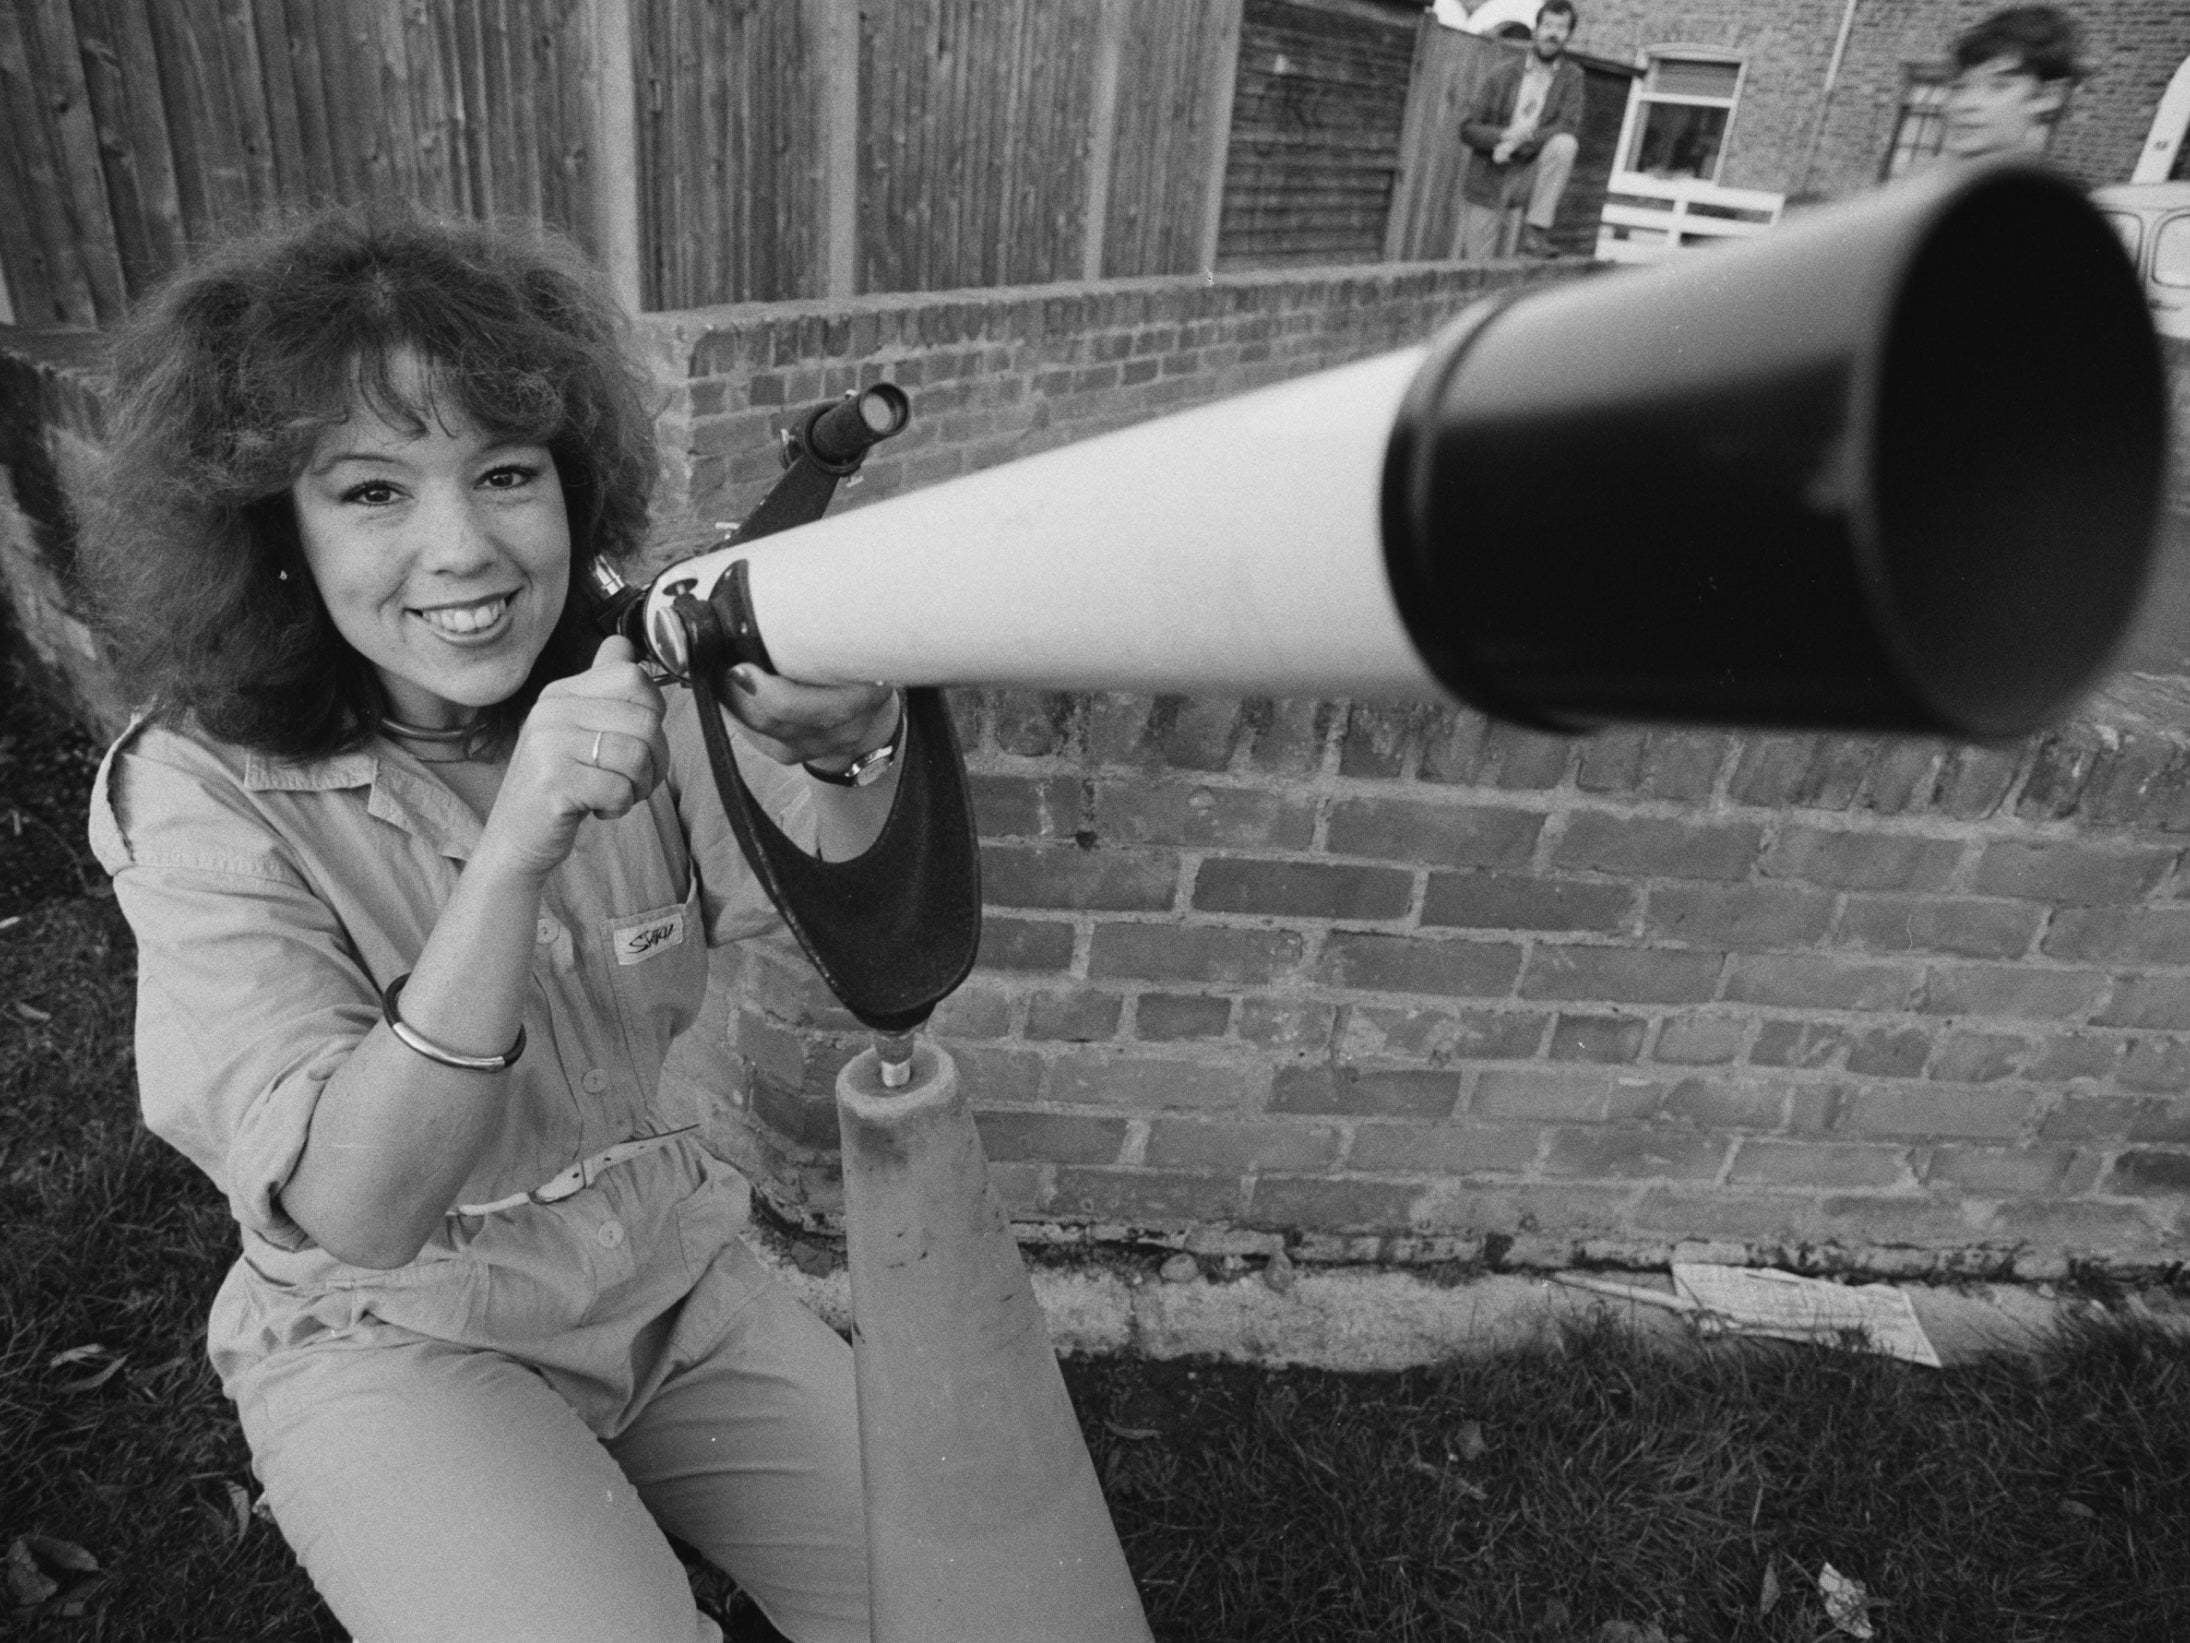 Couper in 1984: she carved out successful careers as broadcaster, author and academic